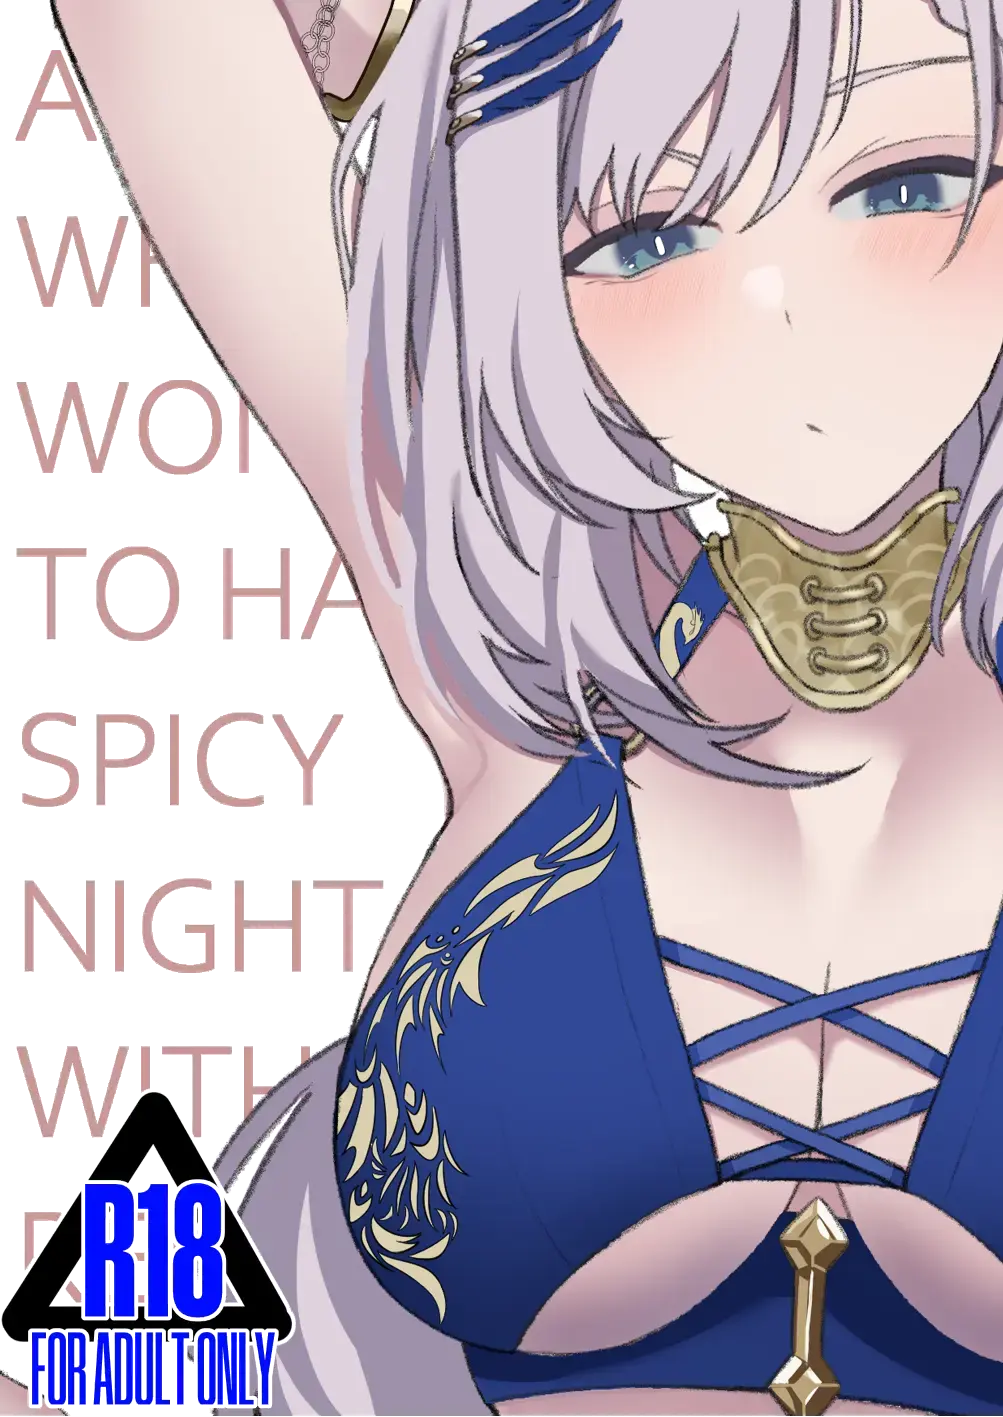 Read [Sifarid] A NEET WHO WON THE CHANCE TO HAVE A SPICY NIGHT WITH REINE - Fhentai.net